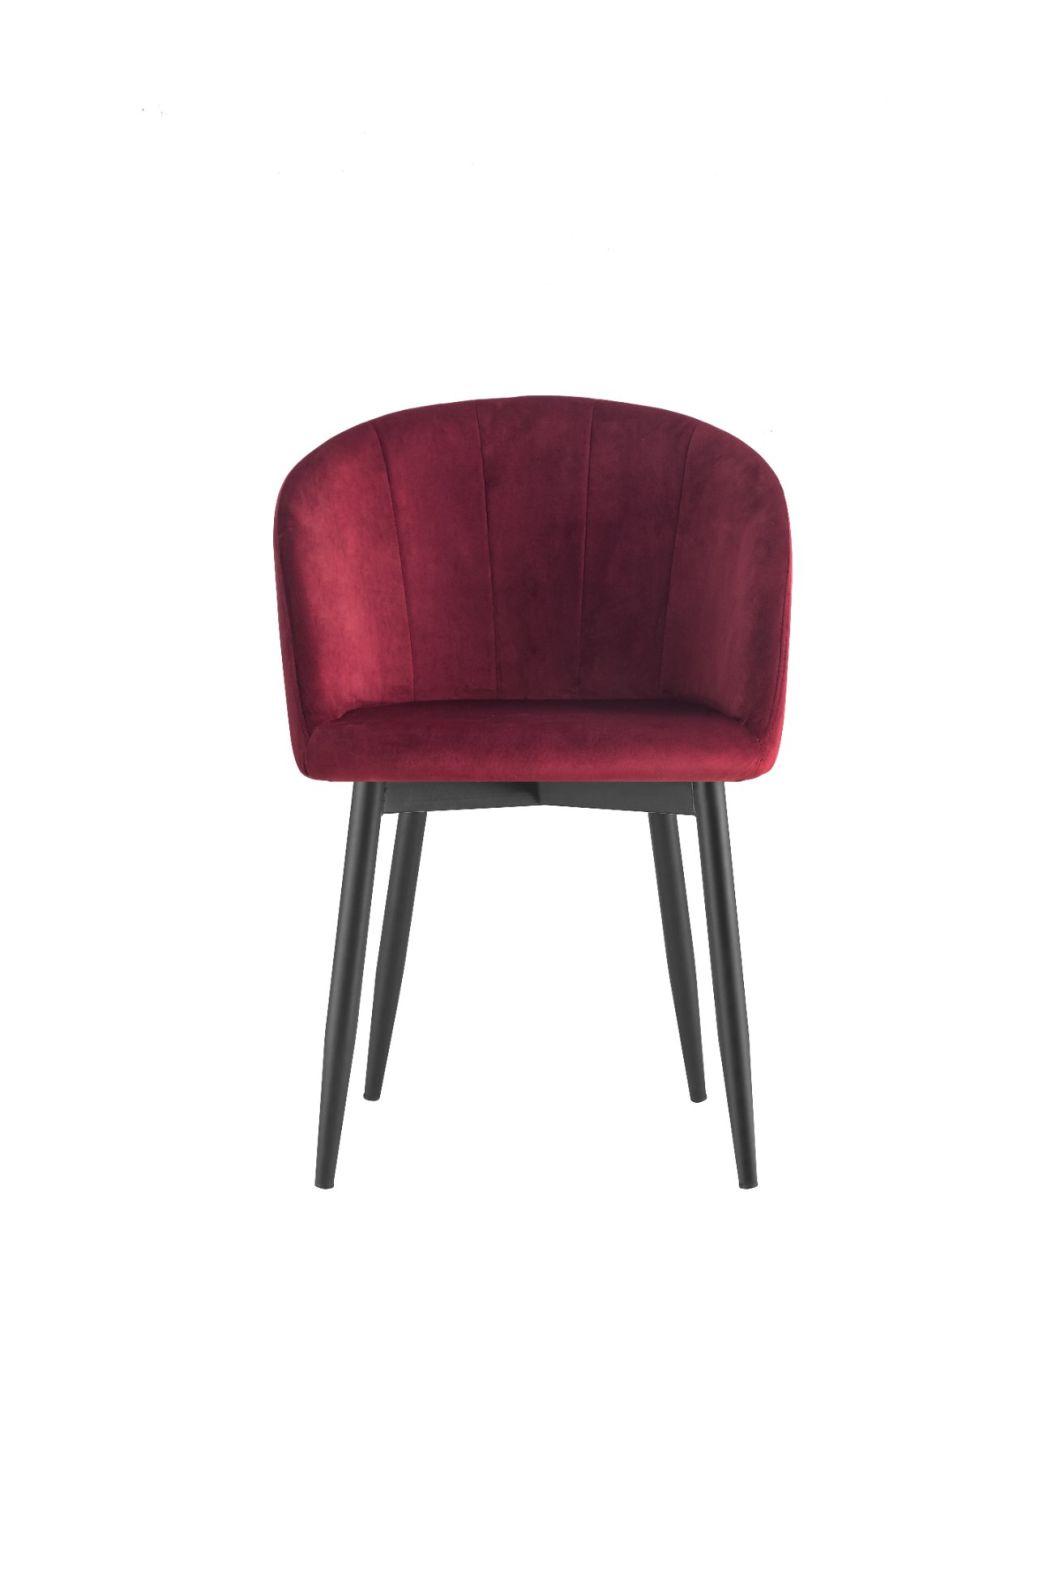 2021 New Design Hot Sale Popular Dining Chairs Good Quality Velvet Fabric Upholstered Dining Chair for Dining Room and Living Room